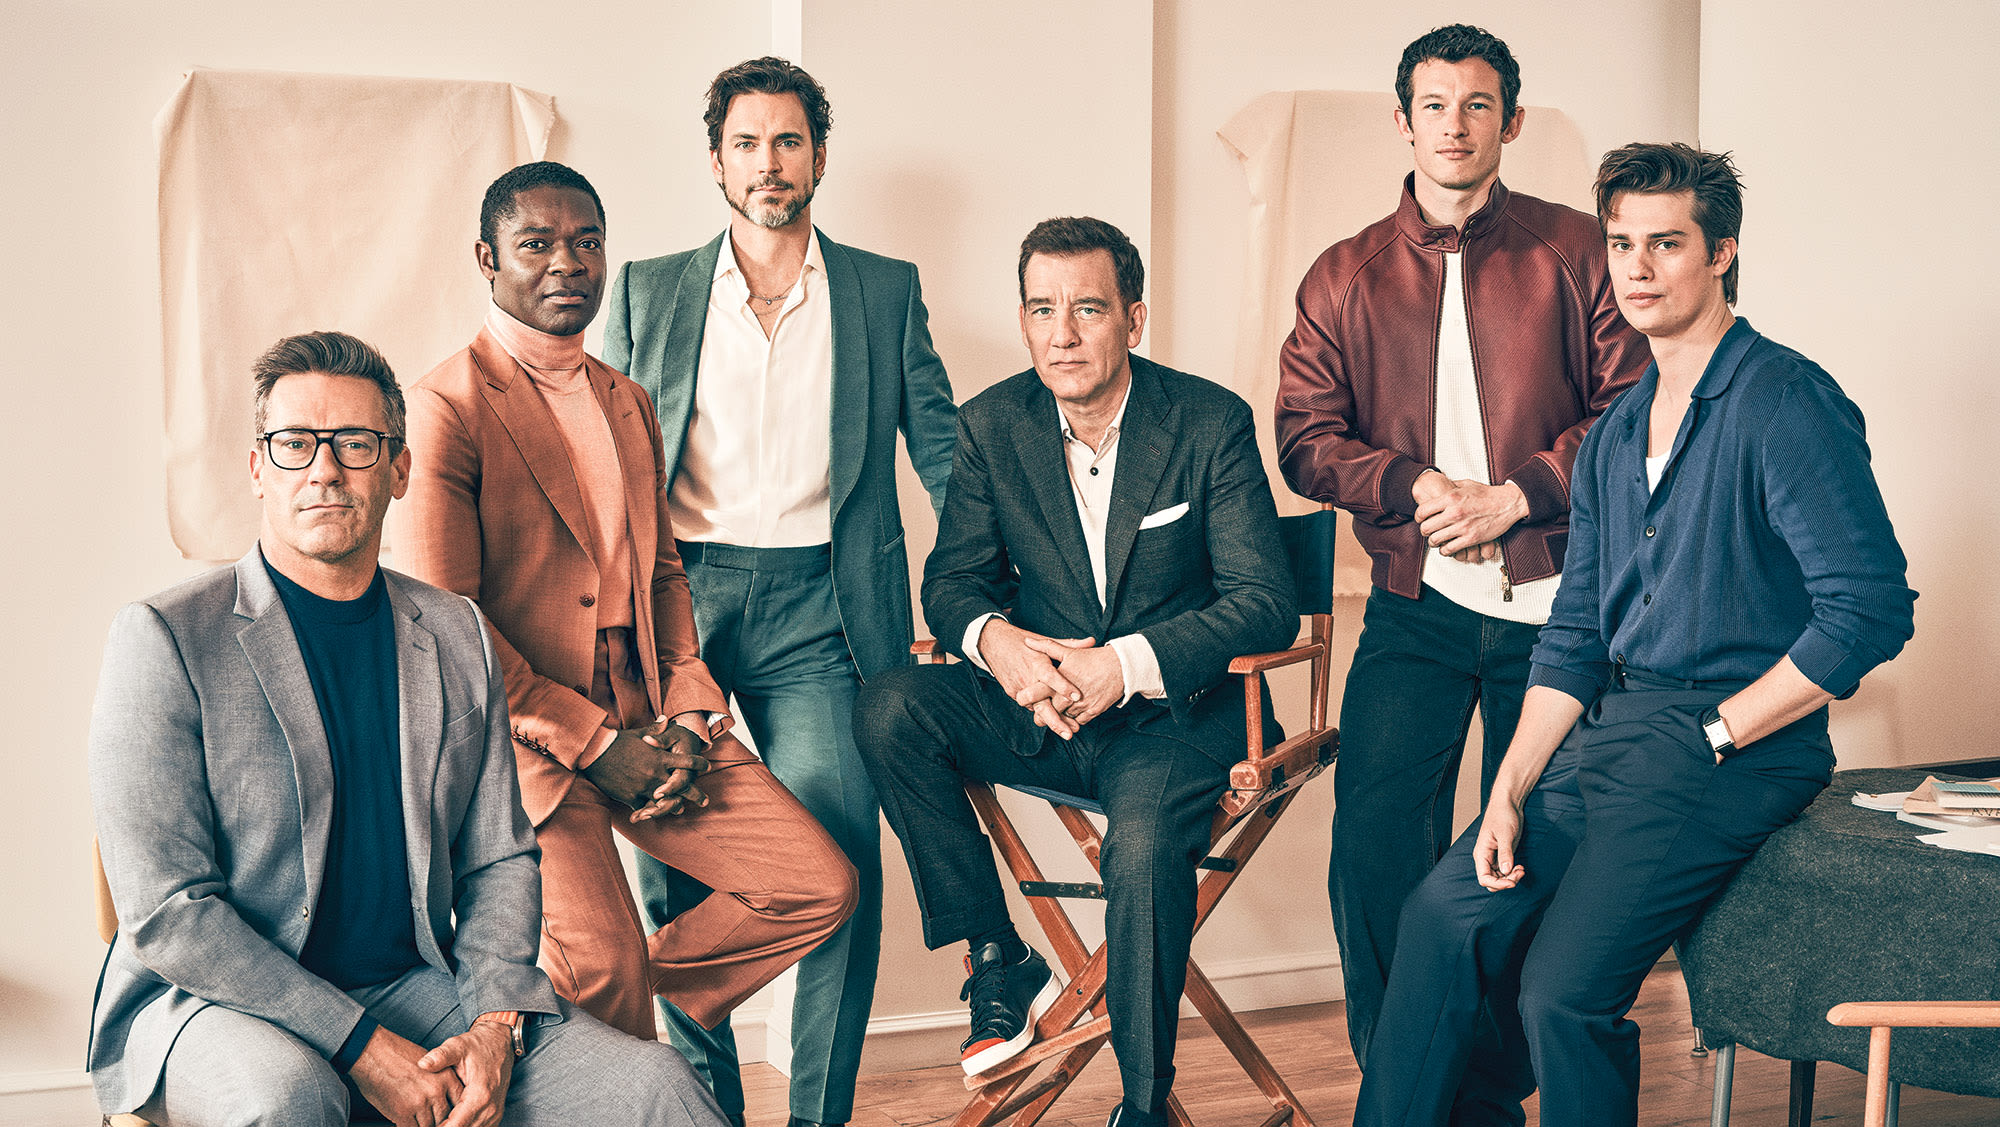 “The Worst Thing That Can Happen Is You Suck”: Jon Hamm, Nicholas Galitzine Get Real on THR’s Drama Actor Roundtable